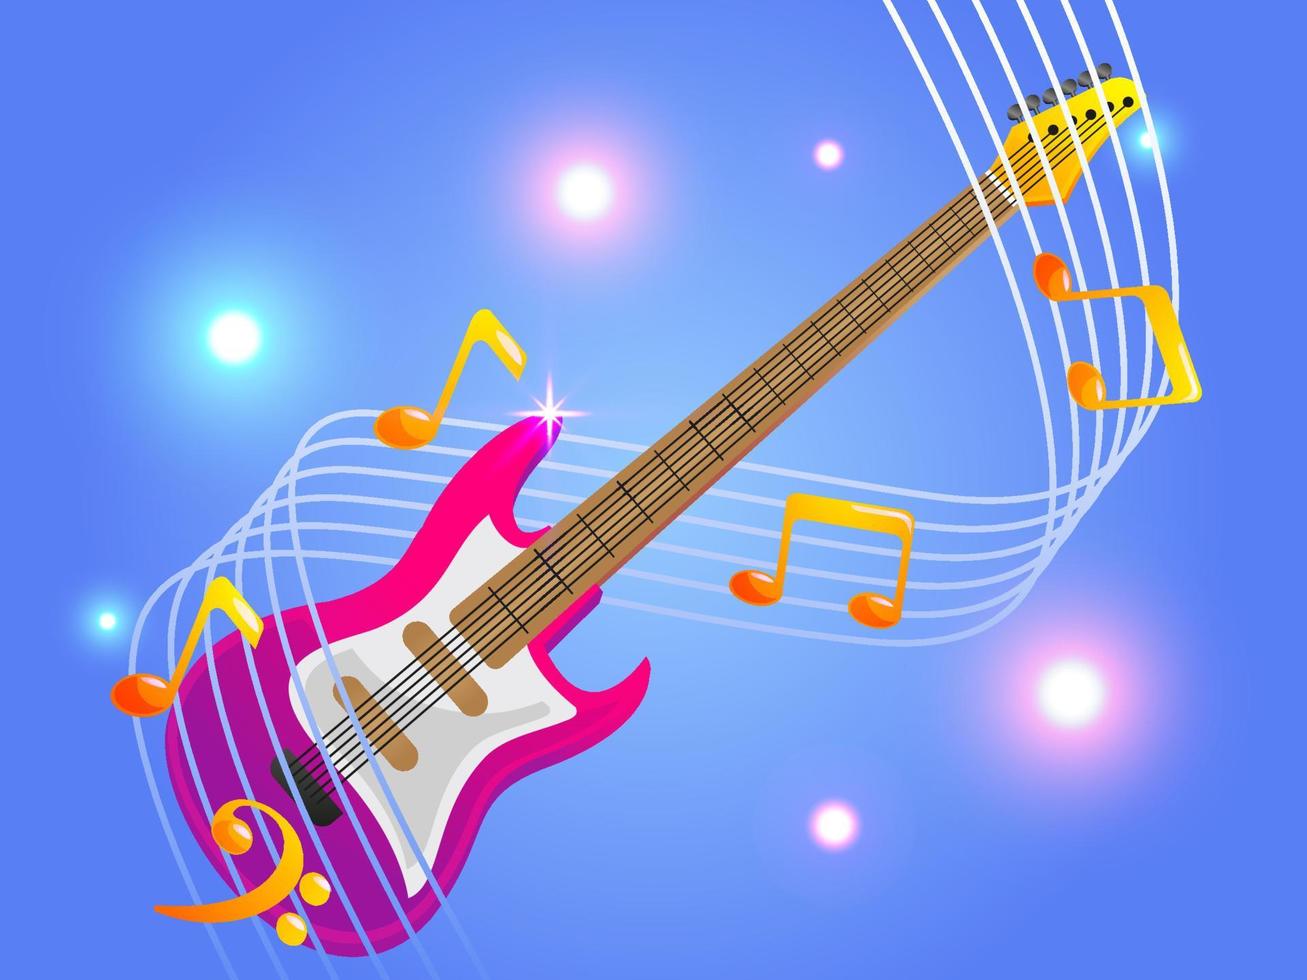 guitar with elegant musical notes music vector